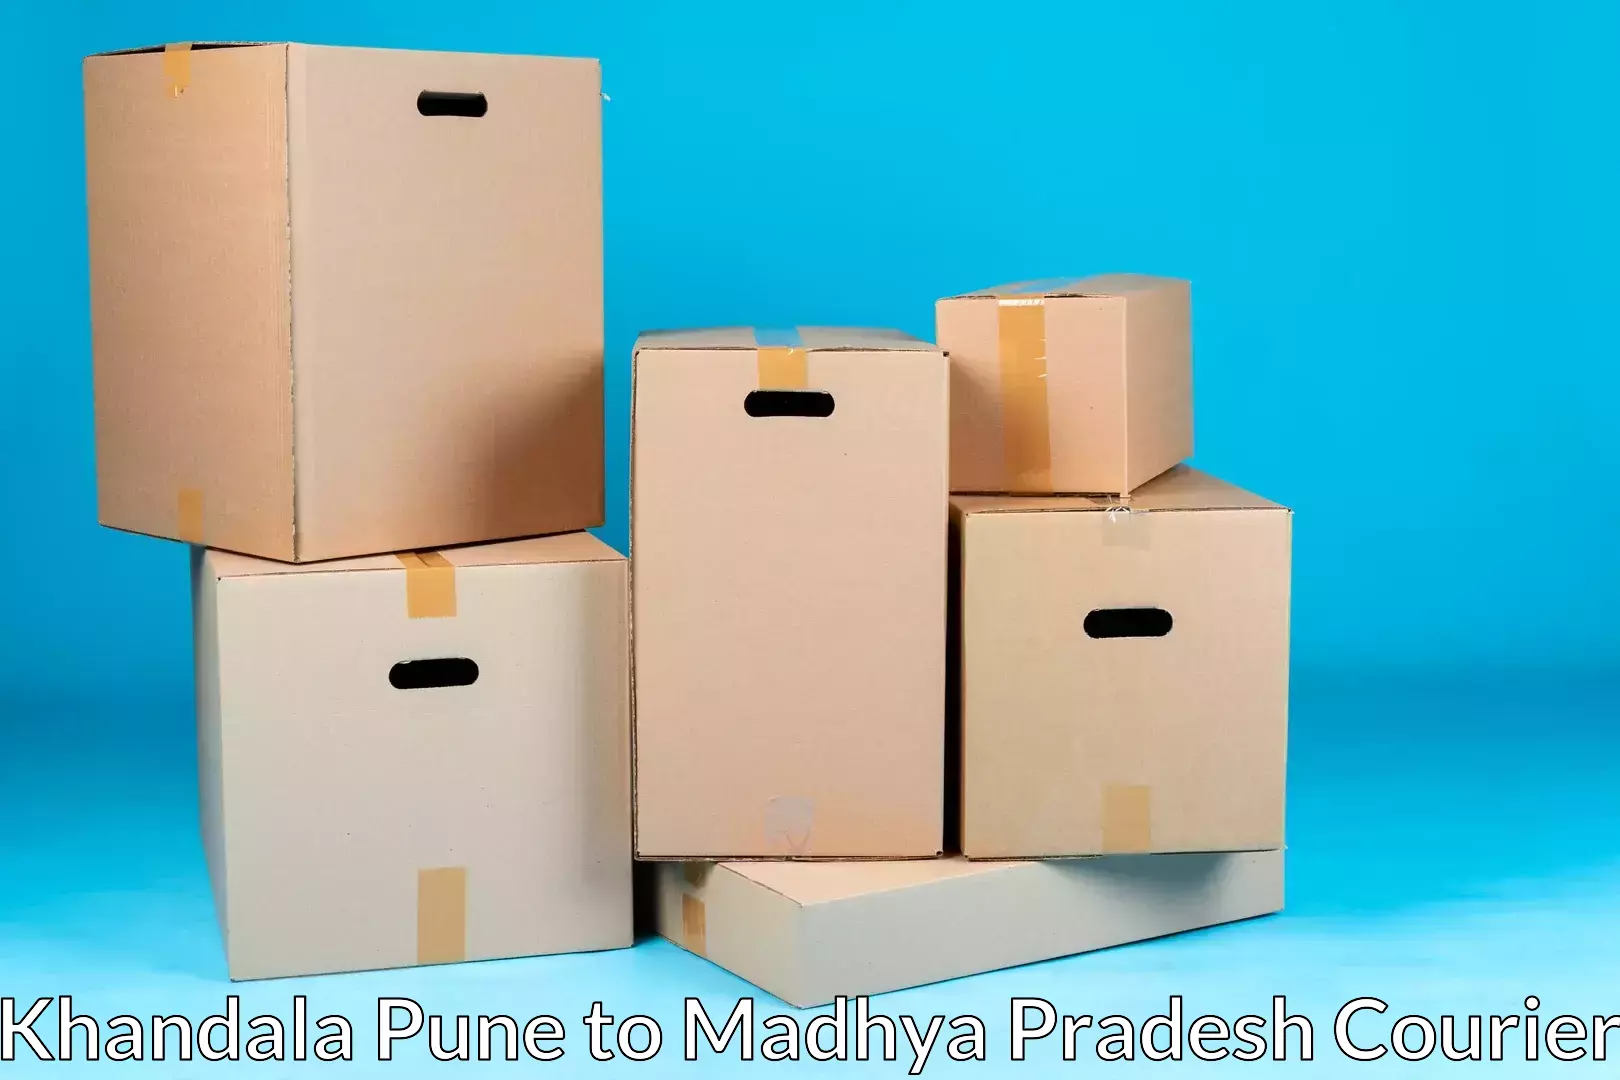 Trusted relocation experts Khandala Pune to Bhopal